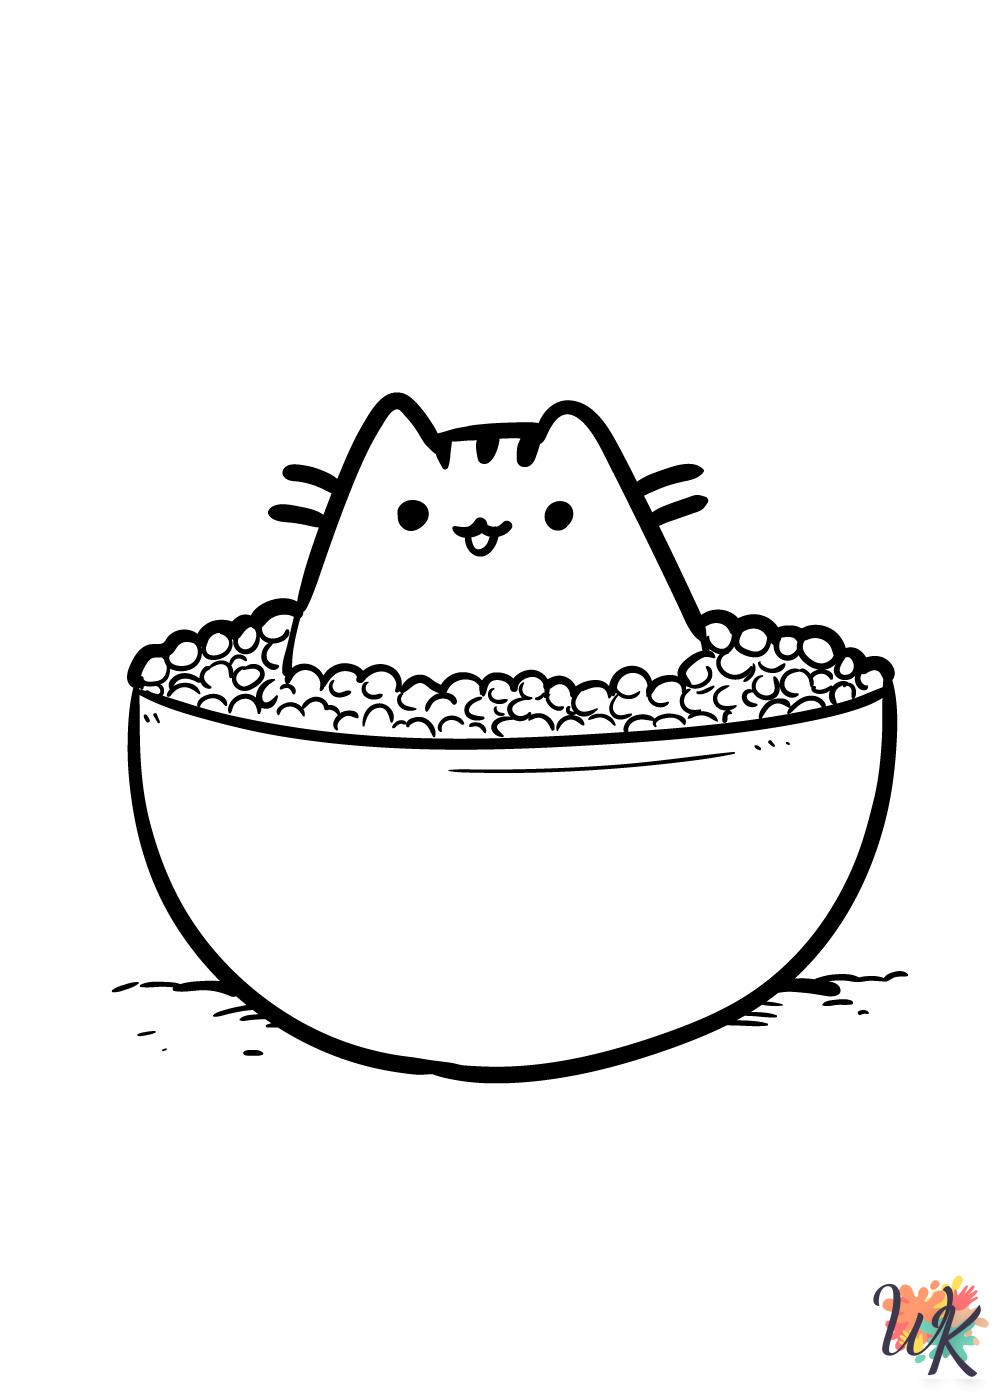 Pusheen coloring pages for adults pdf